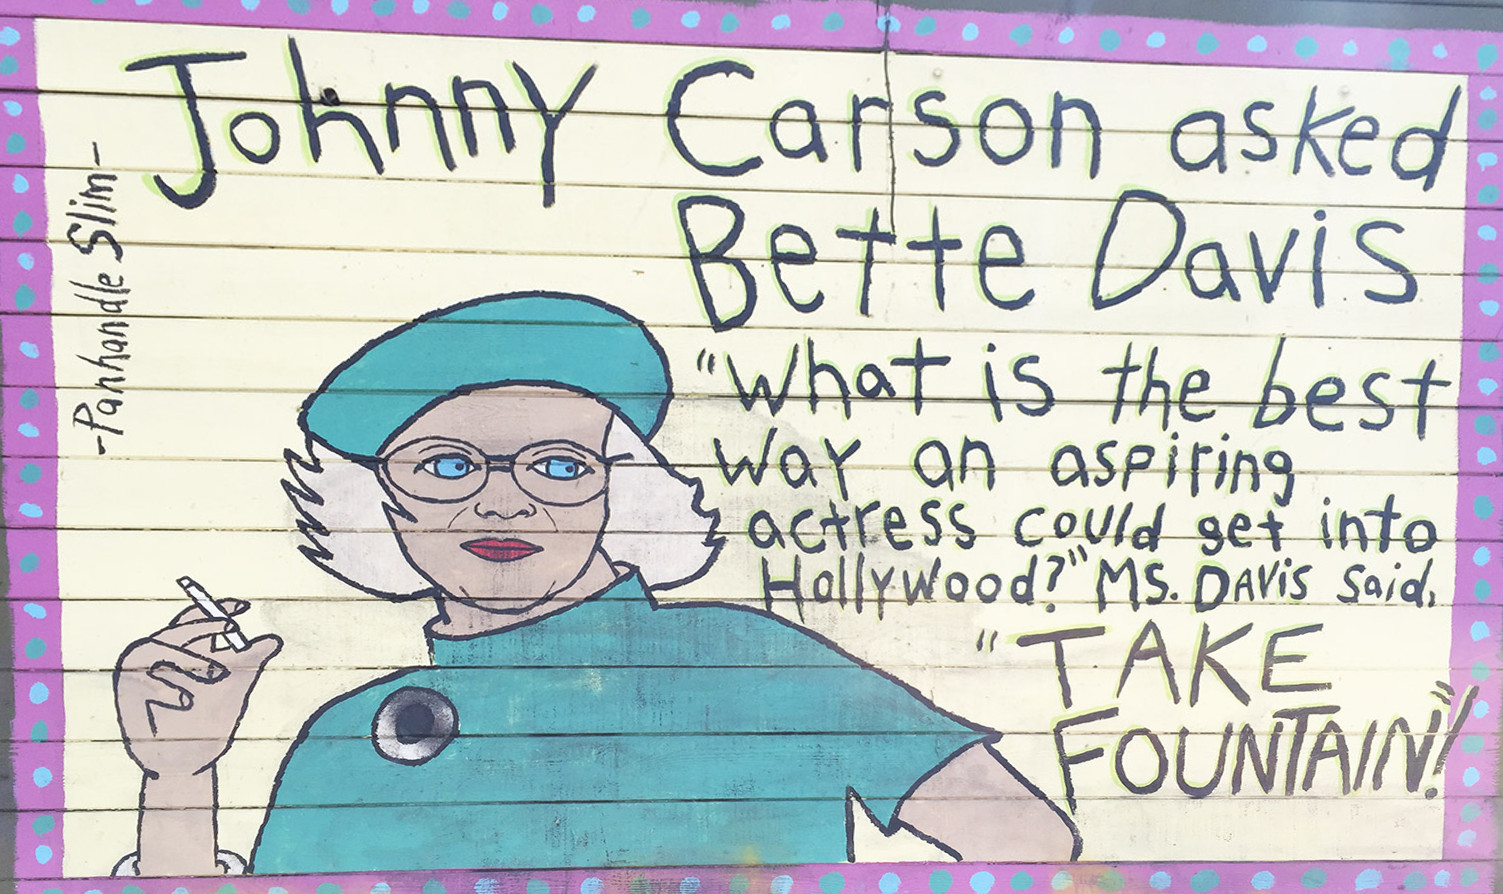 A mural of Bette Davis with the words 'Johnny Carson asked Bette Davis for "the best way an aspiring actress could get into Hollywood?" Ms Davis replied "take Fountain."'